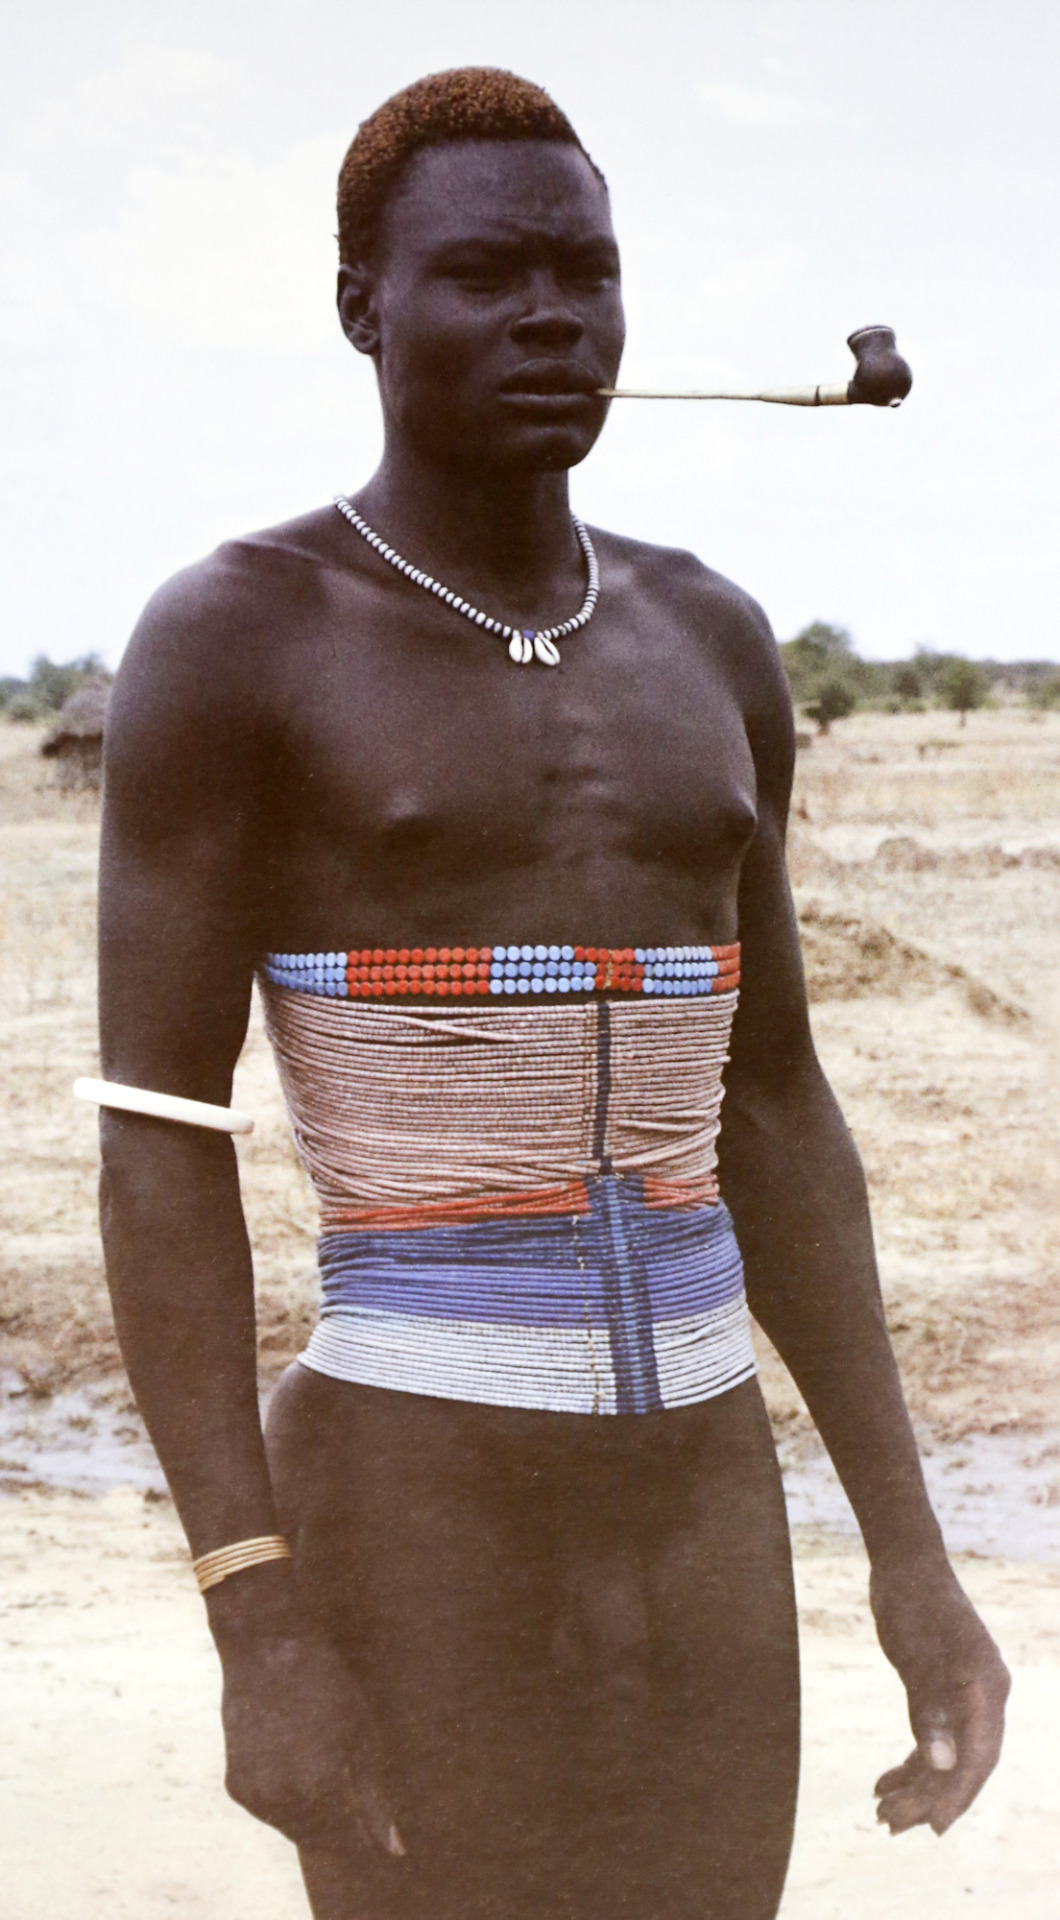 African male, from African Visions: The Diary of an African Photographer, by Mirella